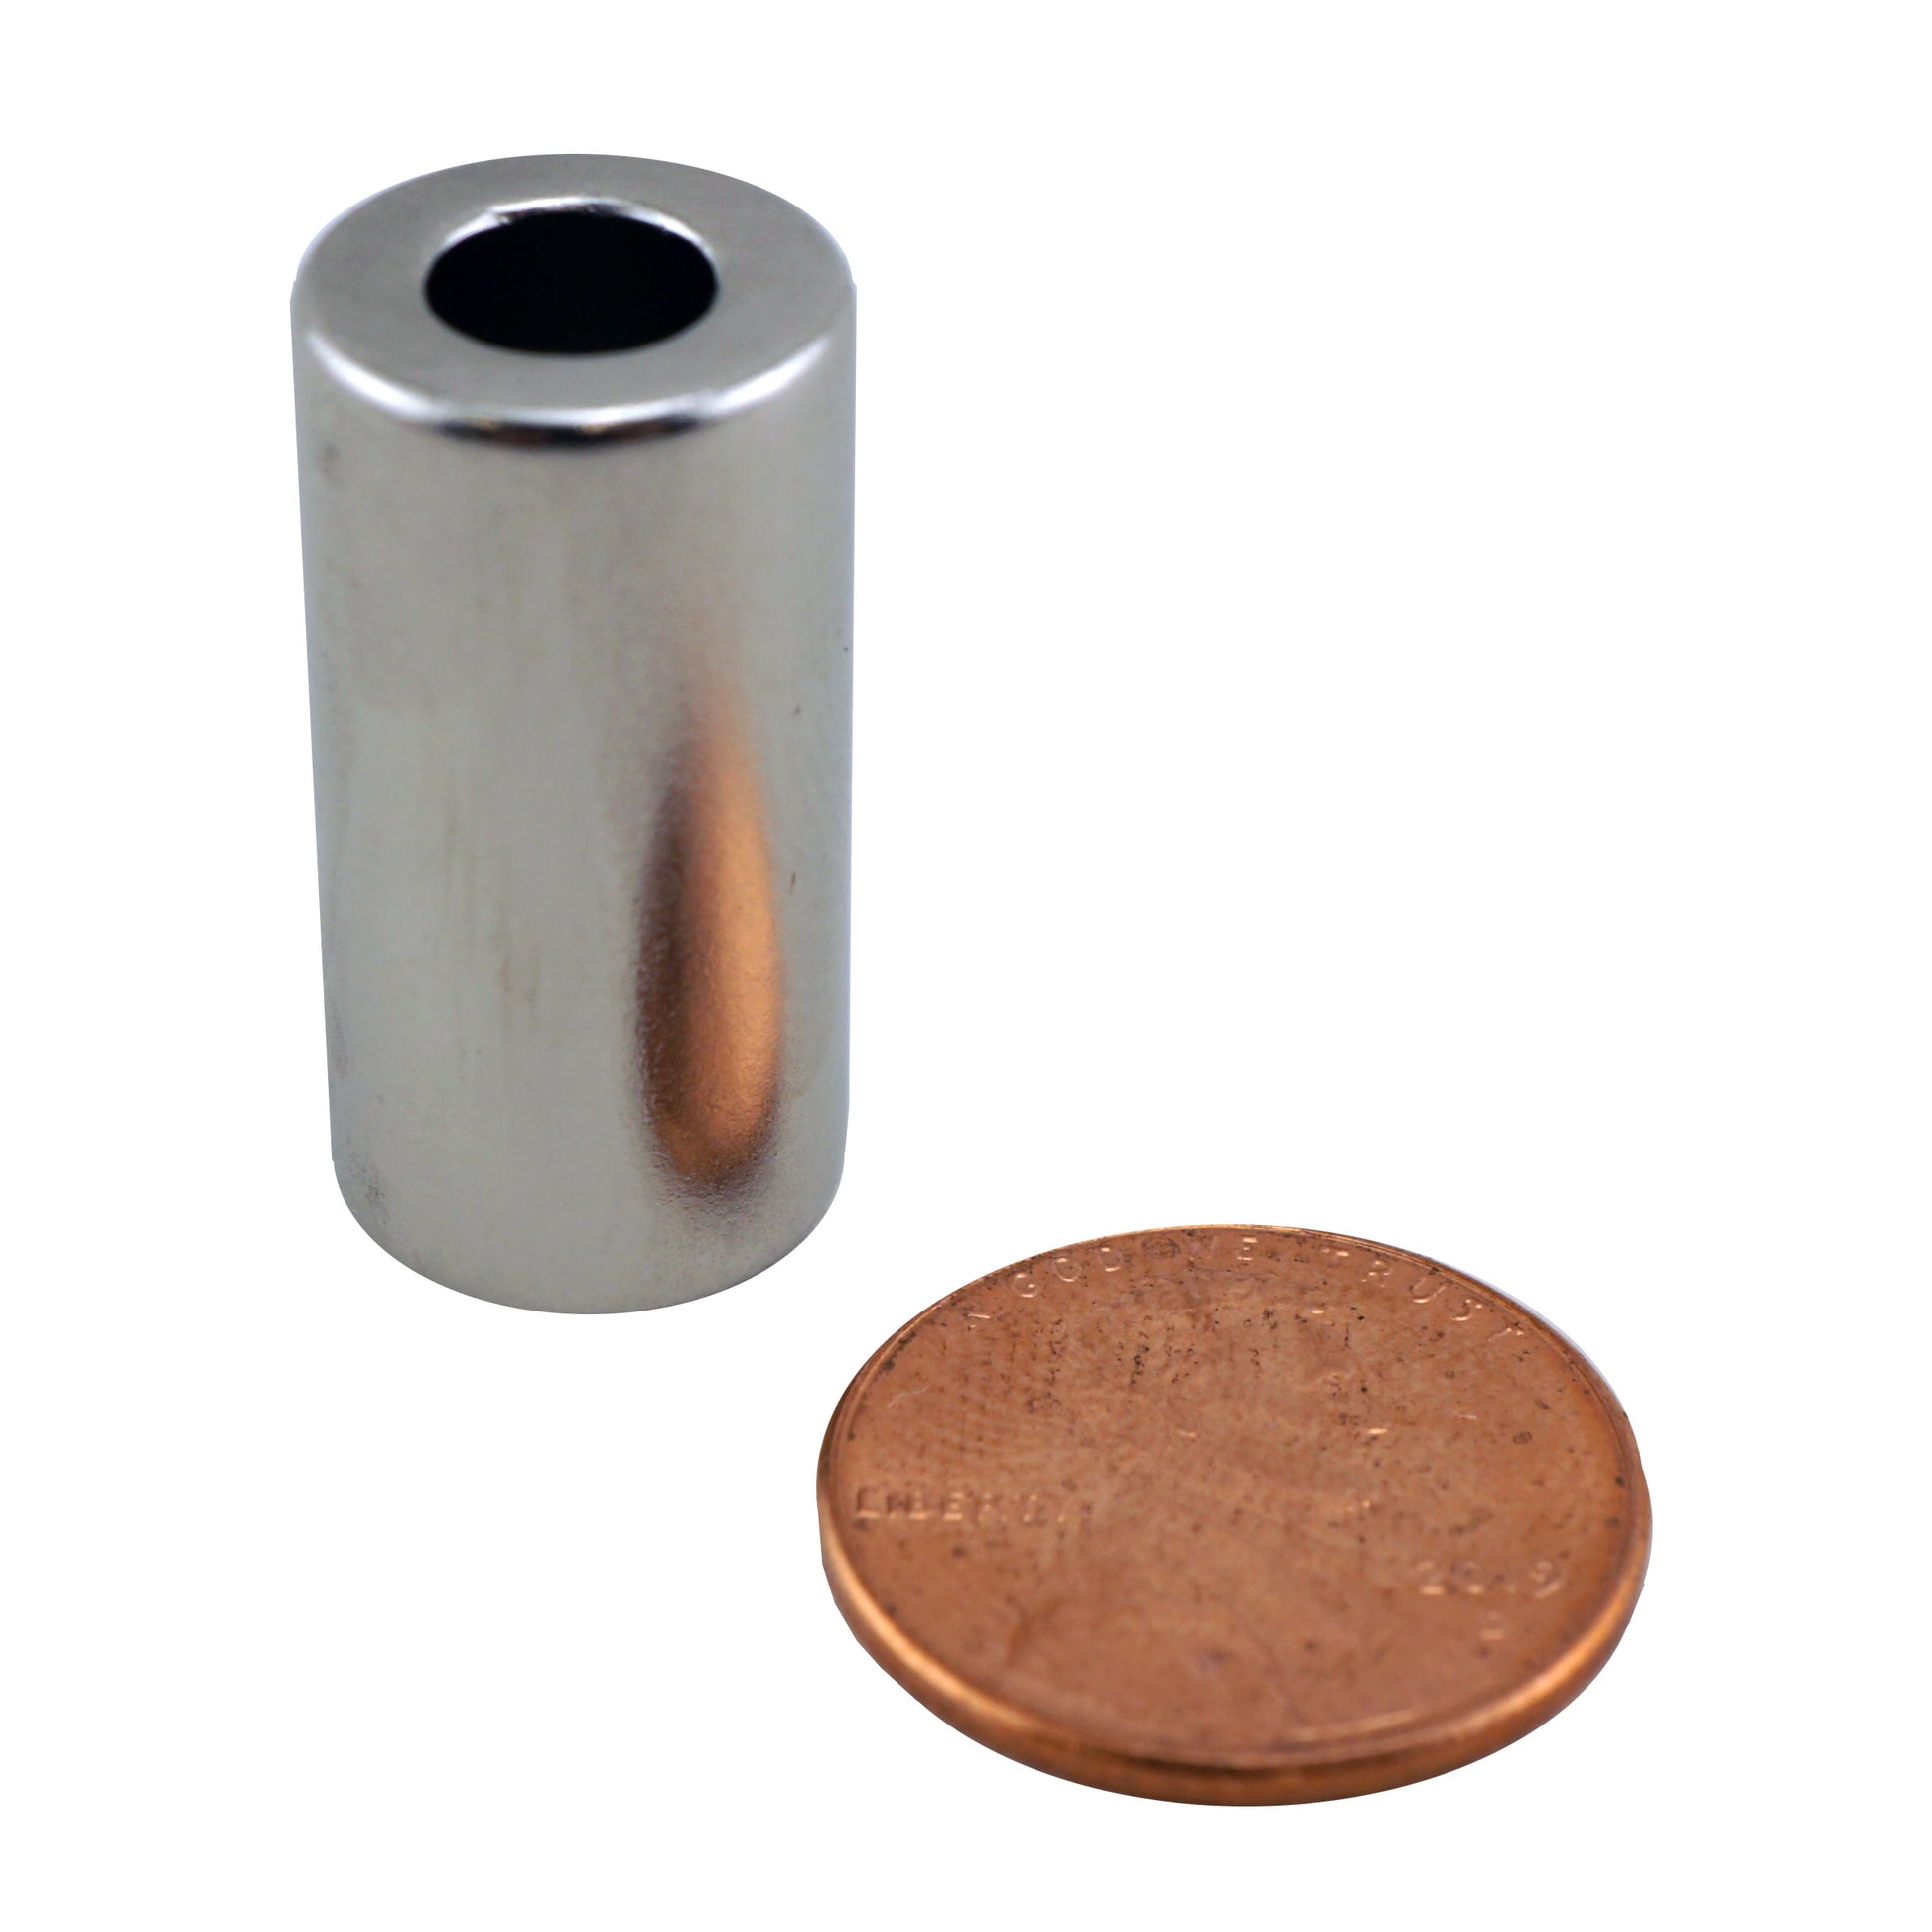 Load image into Gallery viewer, NR005024N Neodymium Ring Magnet - Compared to Penny for Size Reference